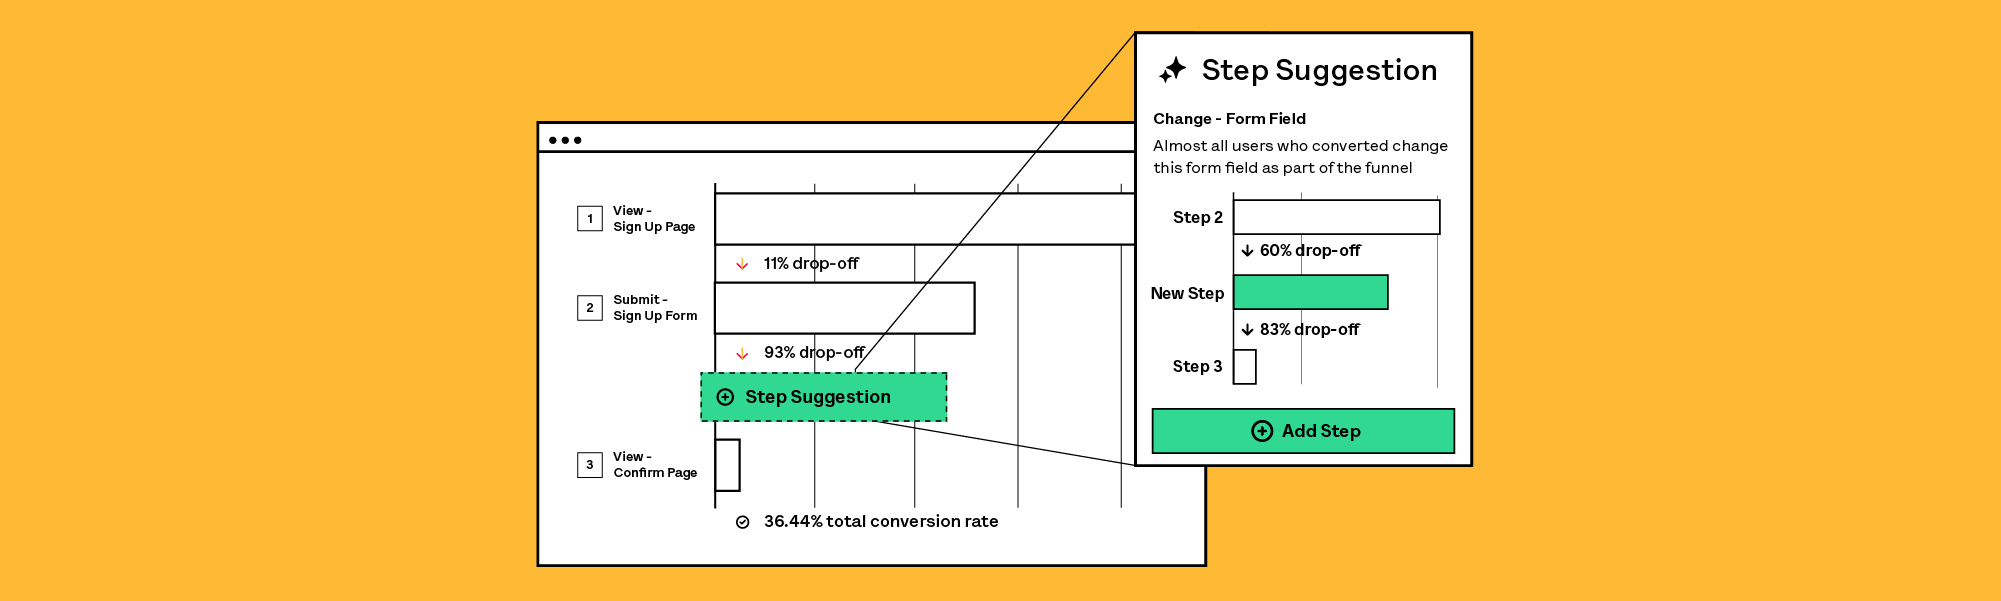 Step Suggestions: How We Take the "Guess and Check" Out of Building Funnels